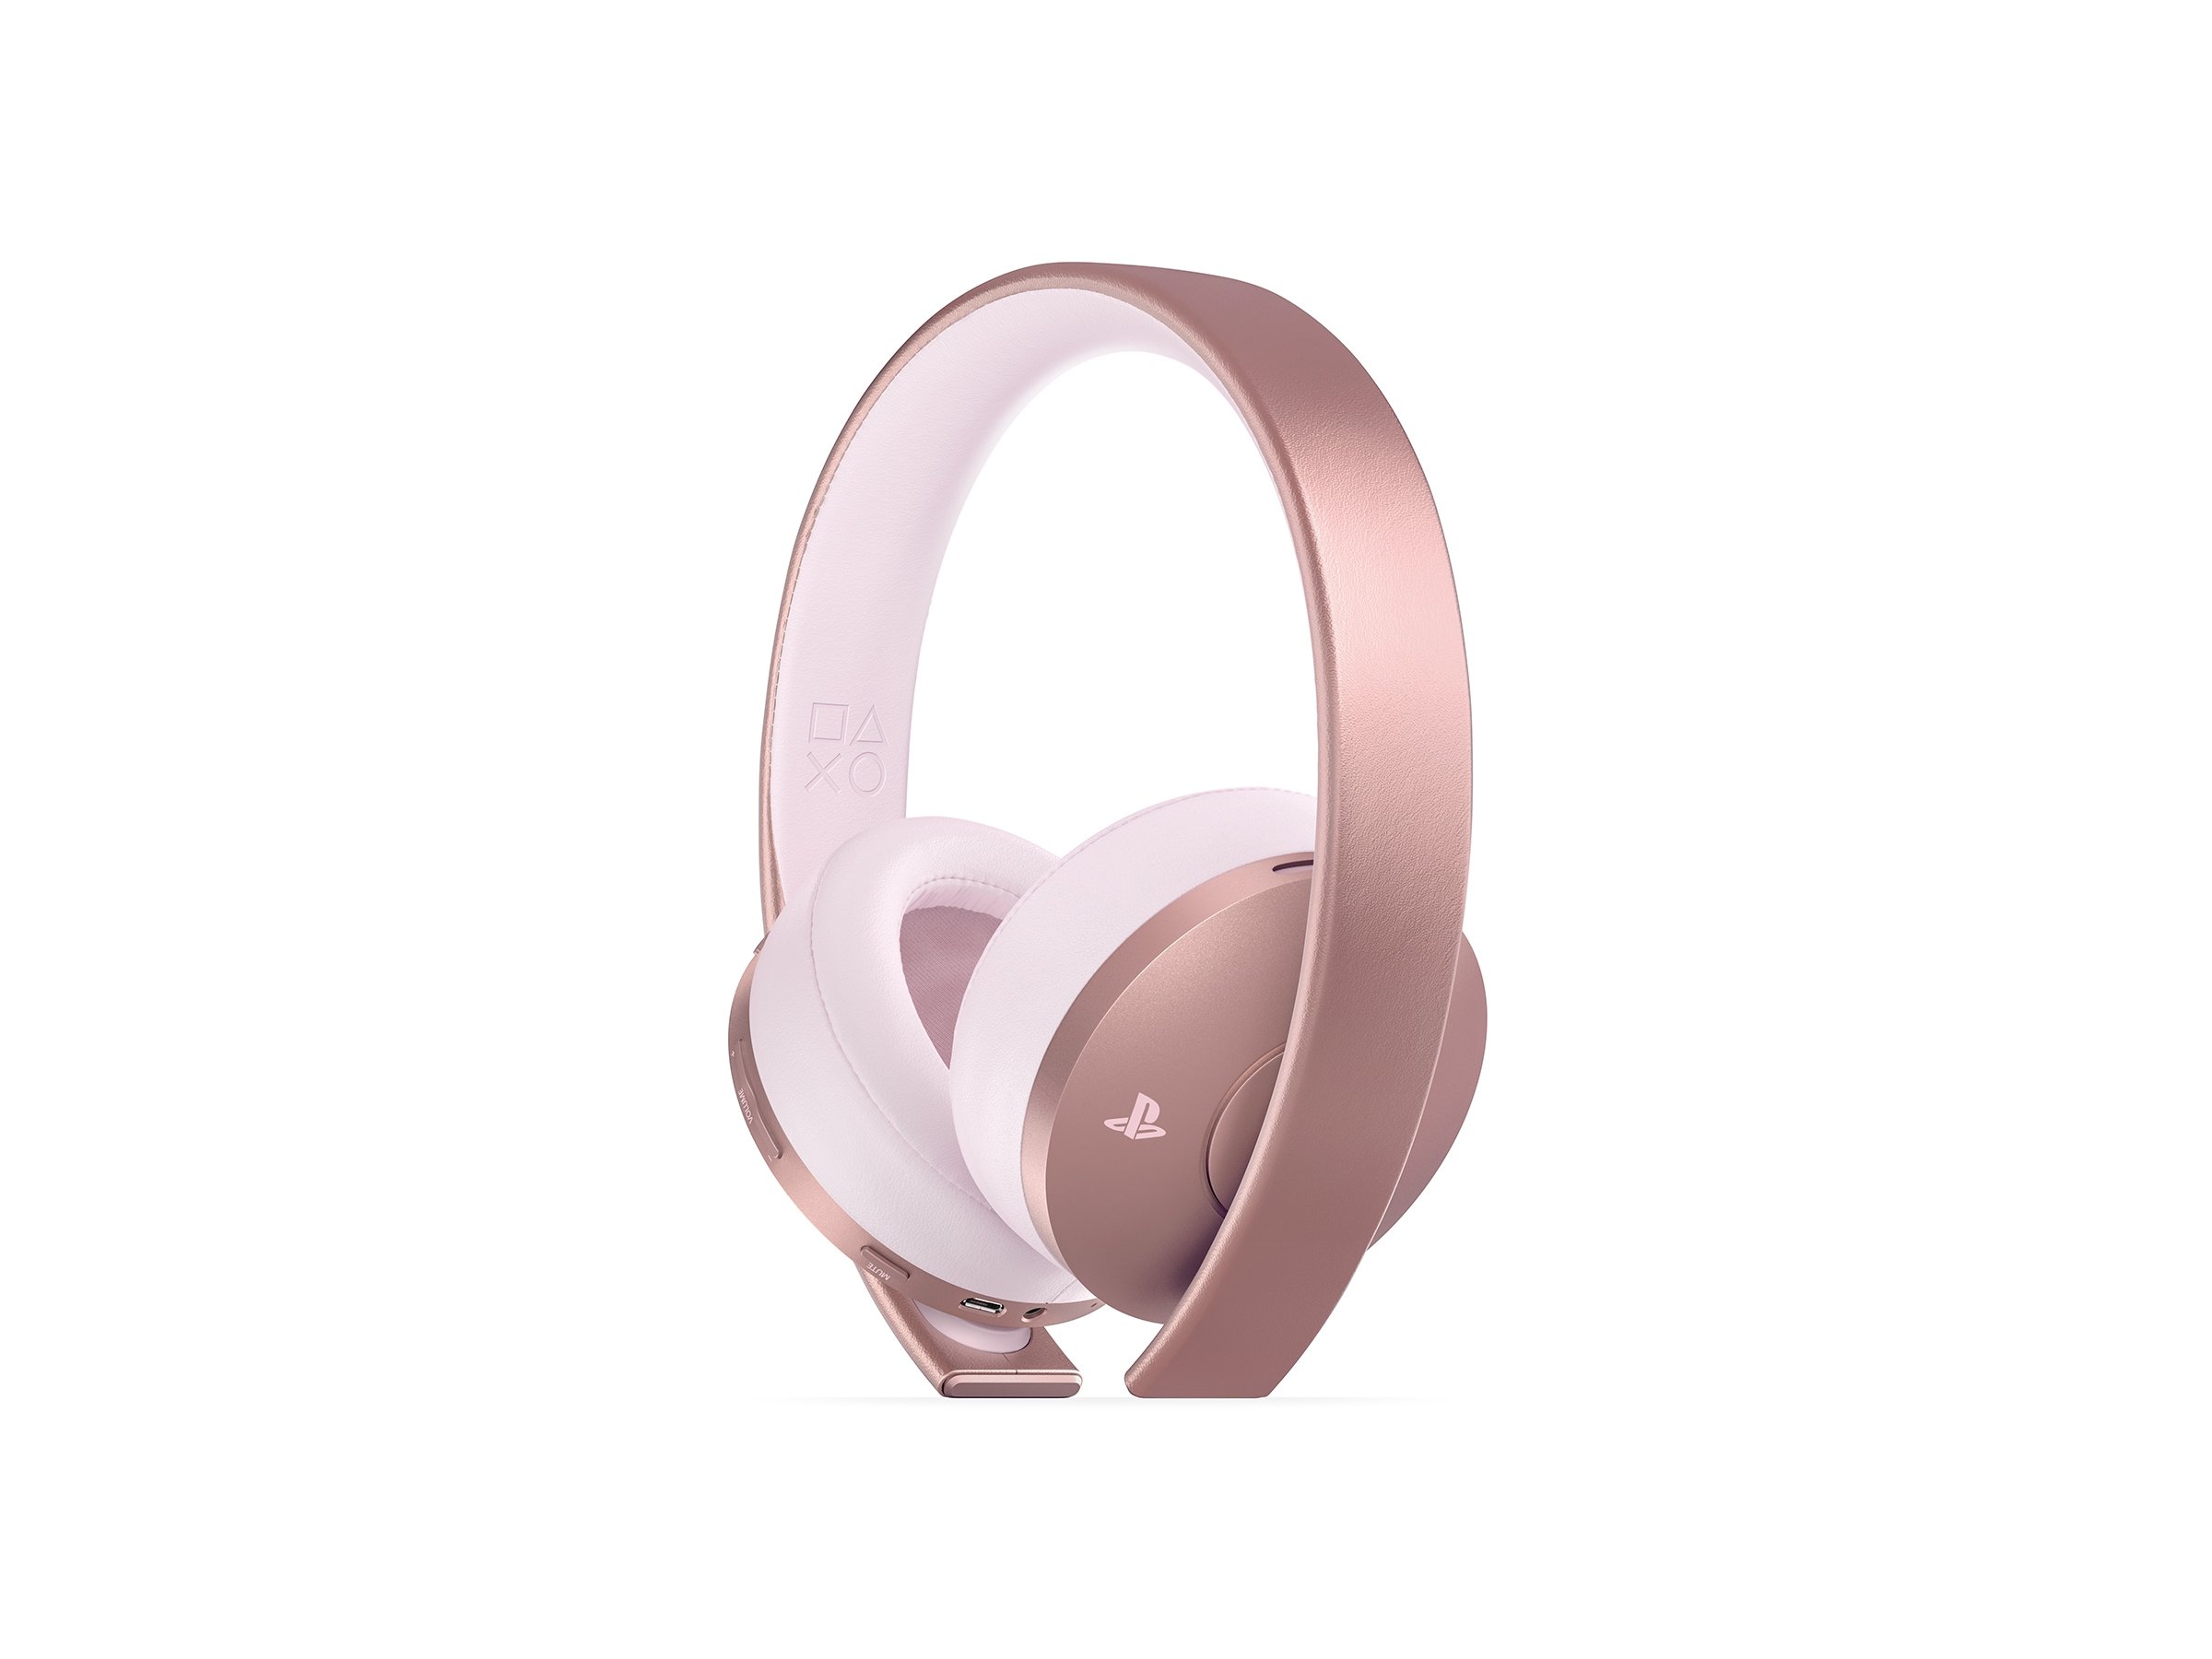 PS4 New Official Sony Gold Wireless Headset 7.1 (Rose Gold)